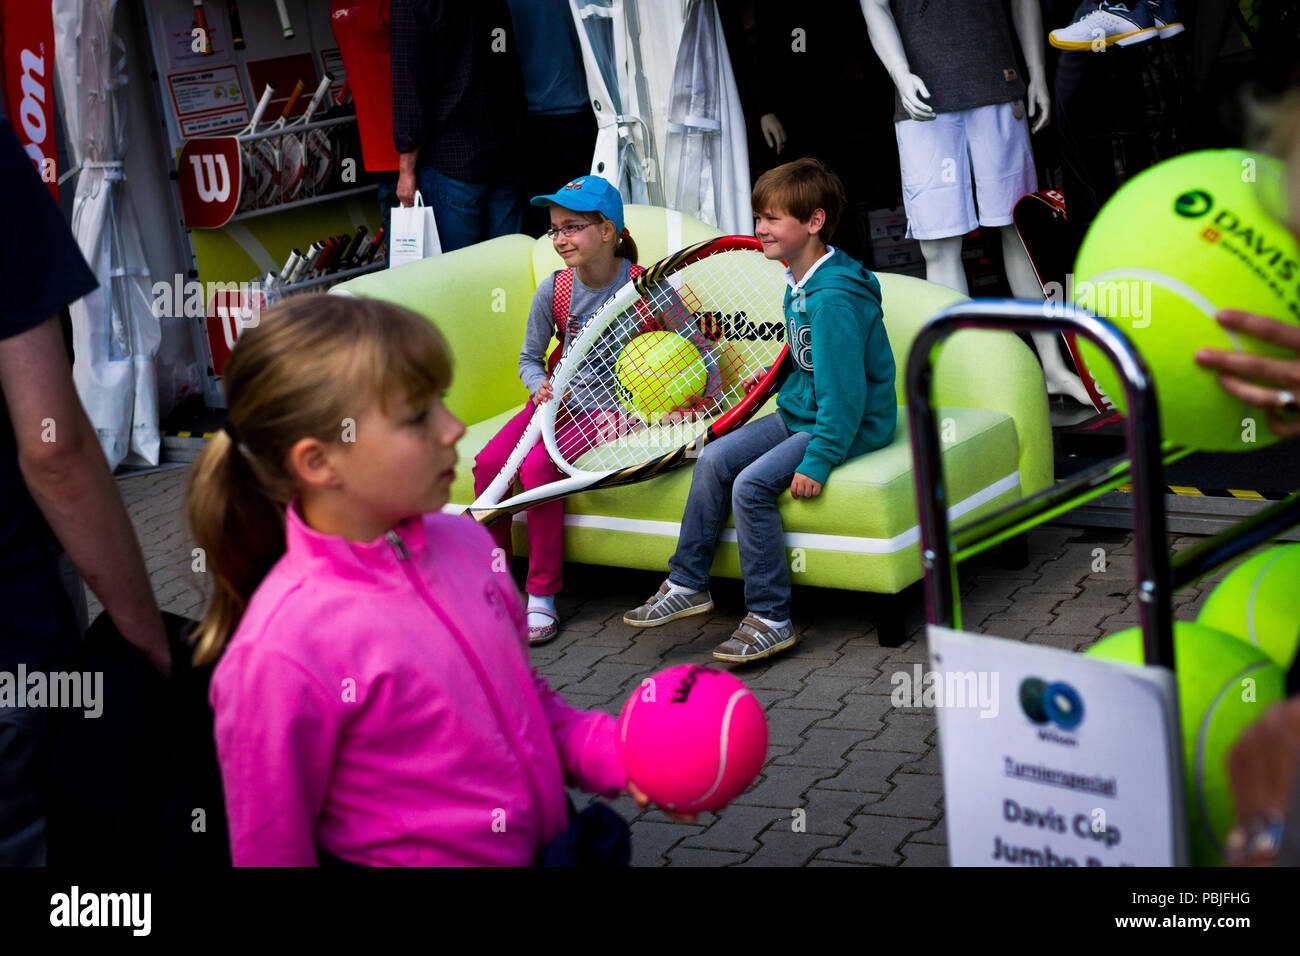 Young tennis fans pose for a photograph on a sofa with an oversized tennis racket and ball at the Gerry Weber Open in Halle (Westfalen), Germany Stock Photo